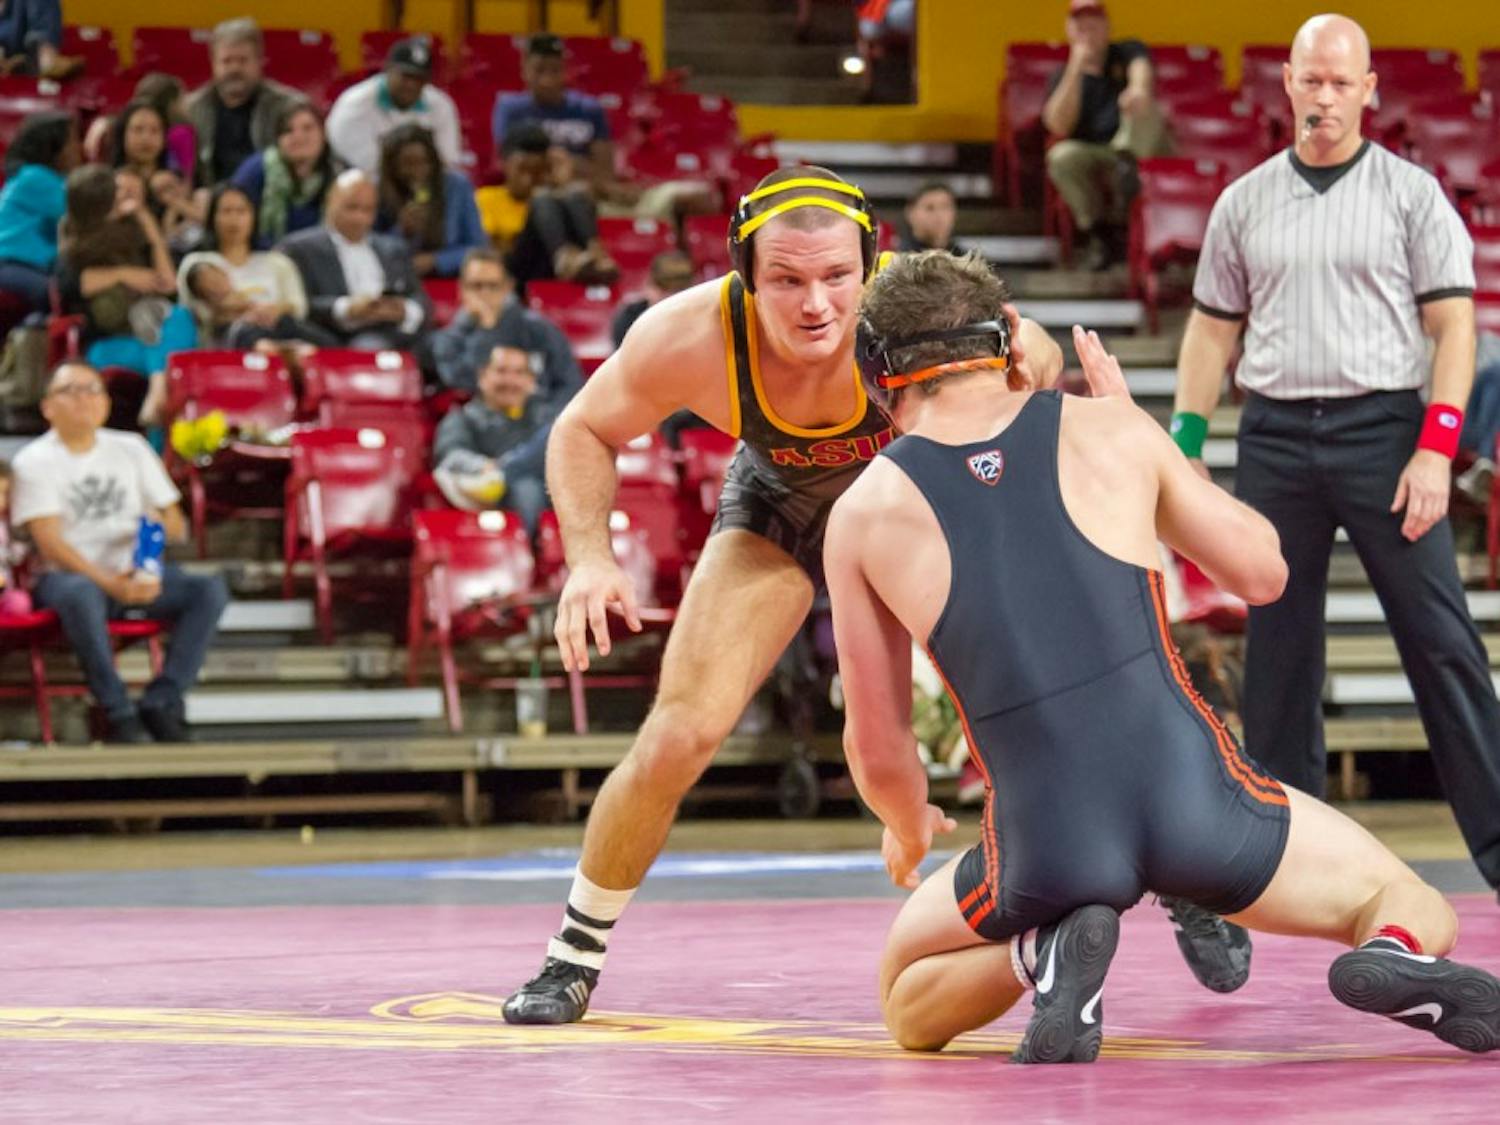 Redshirt senior Blake Stauffer faces off against Corey Griego from Oregon State on Friday, Jan. 29, 2016 at the Wells Fargo Arena in Tempe.